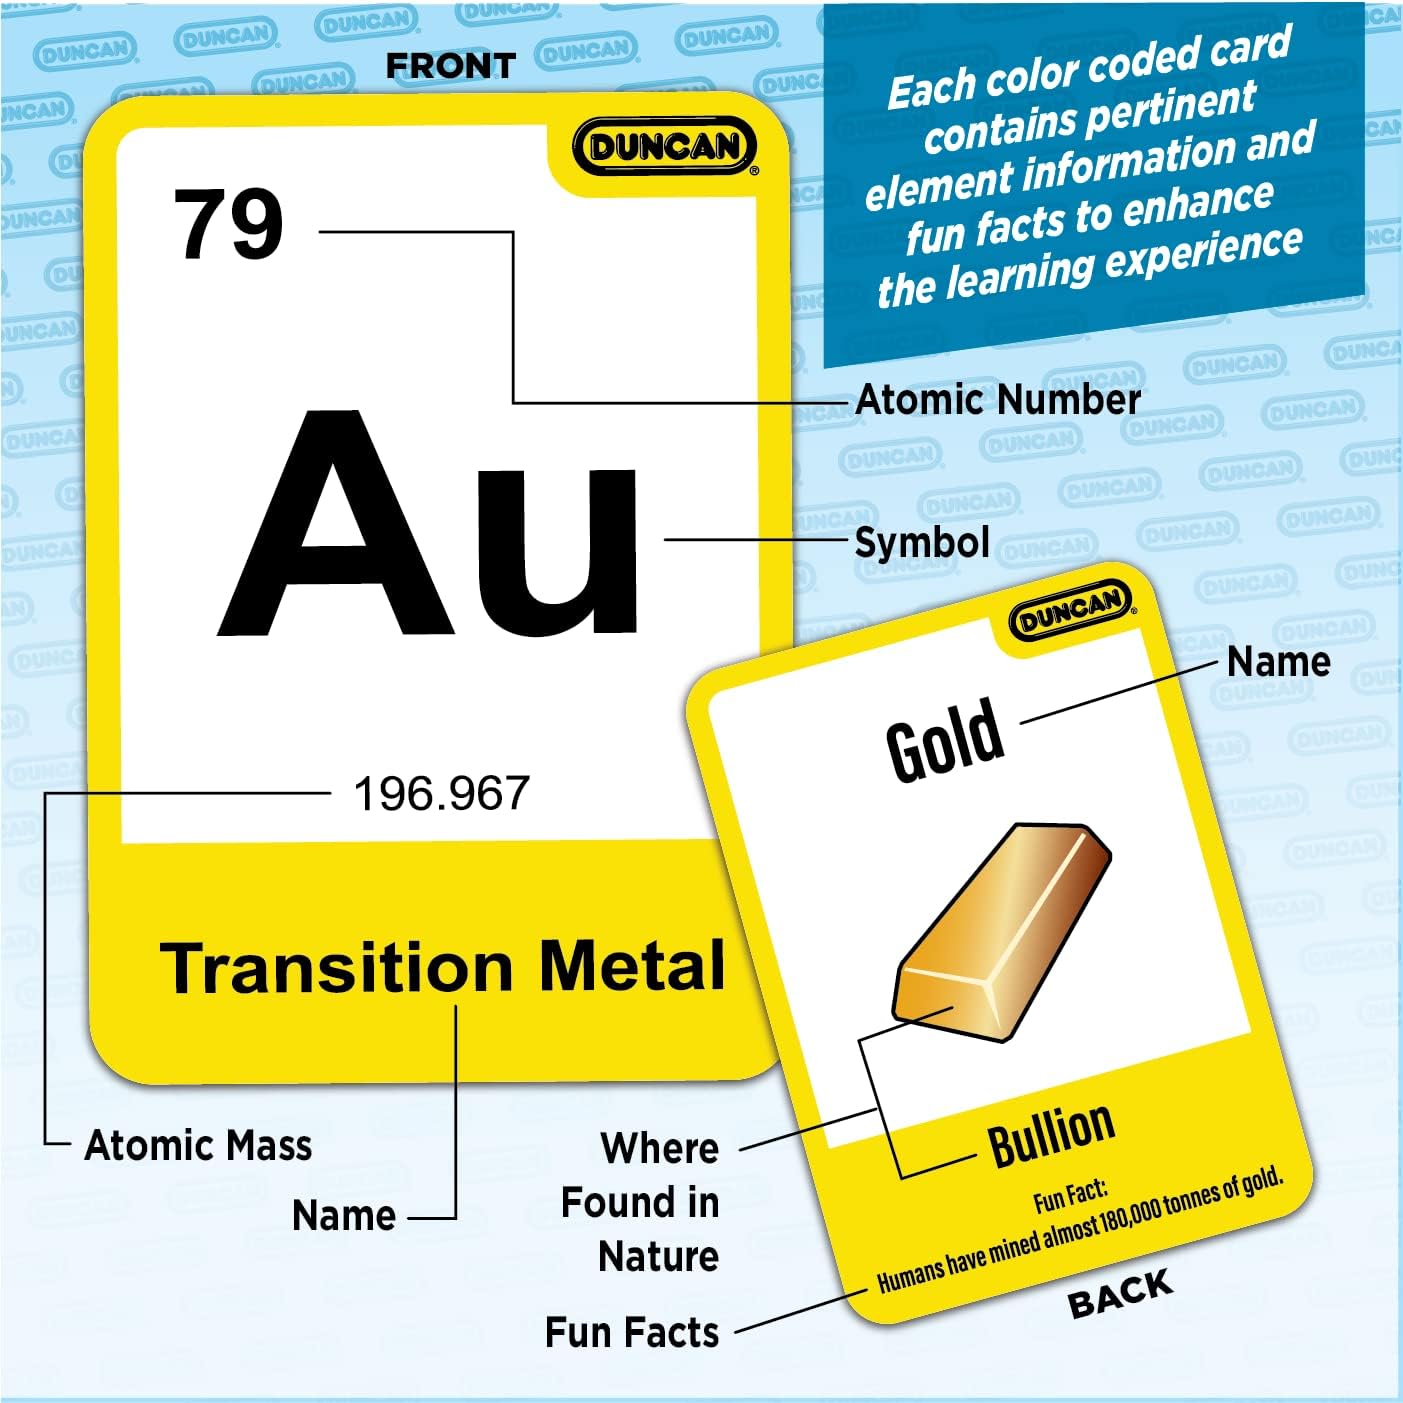 Periodic Table Flash Cards